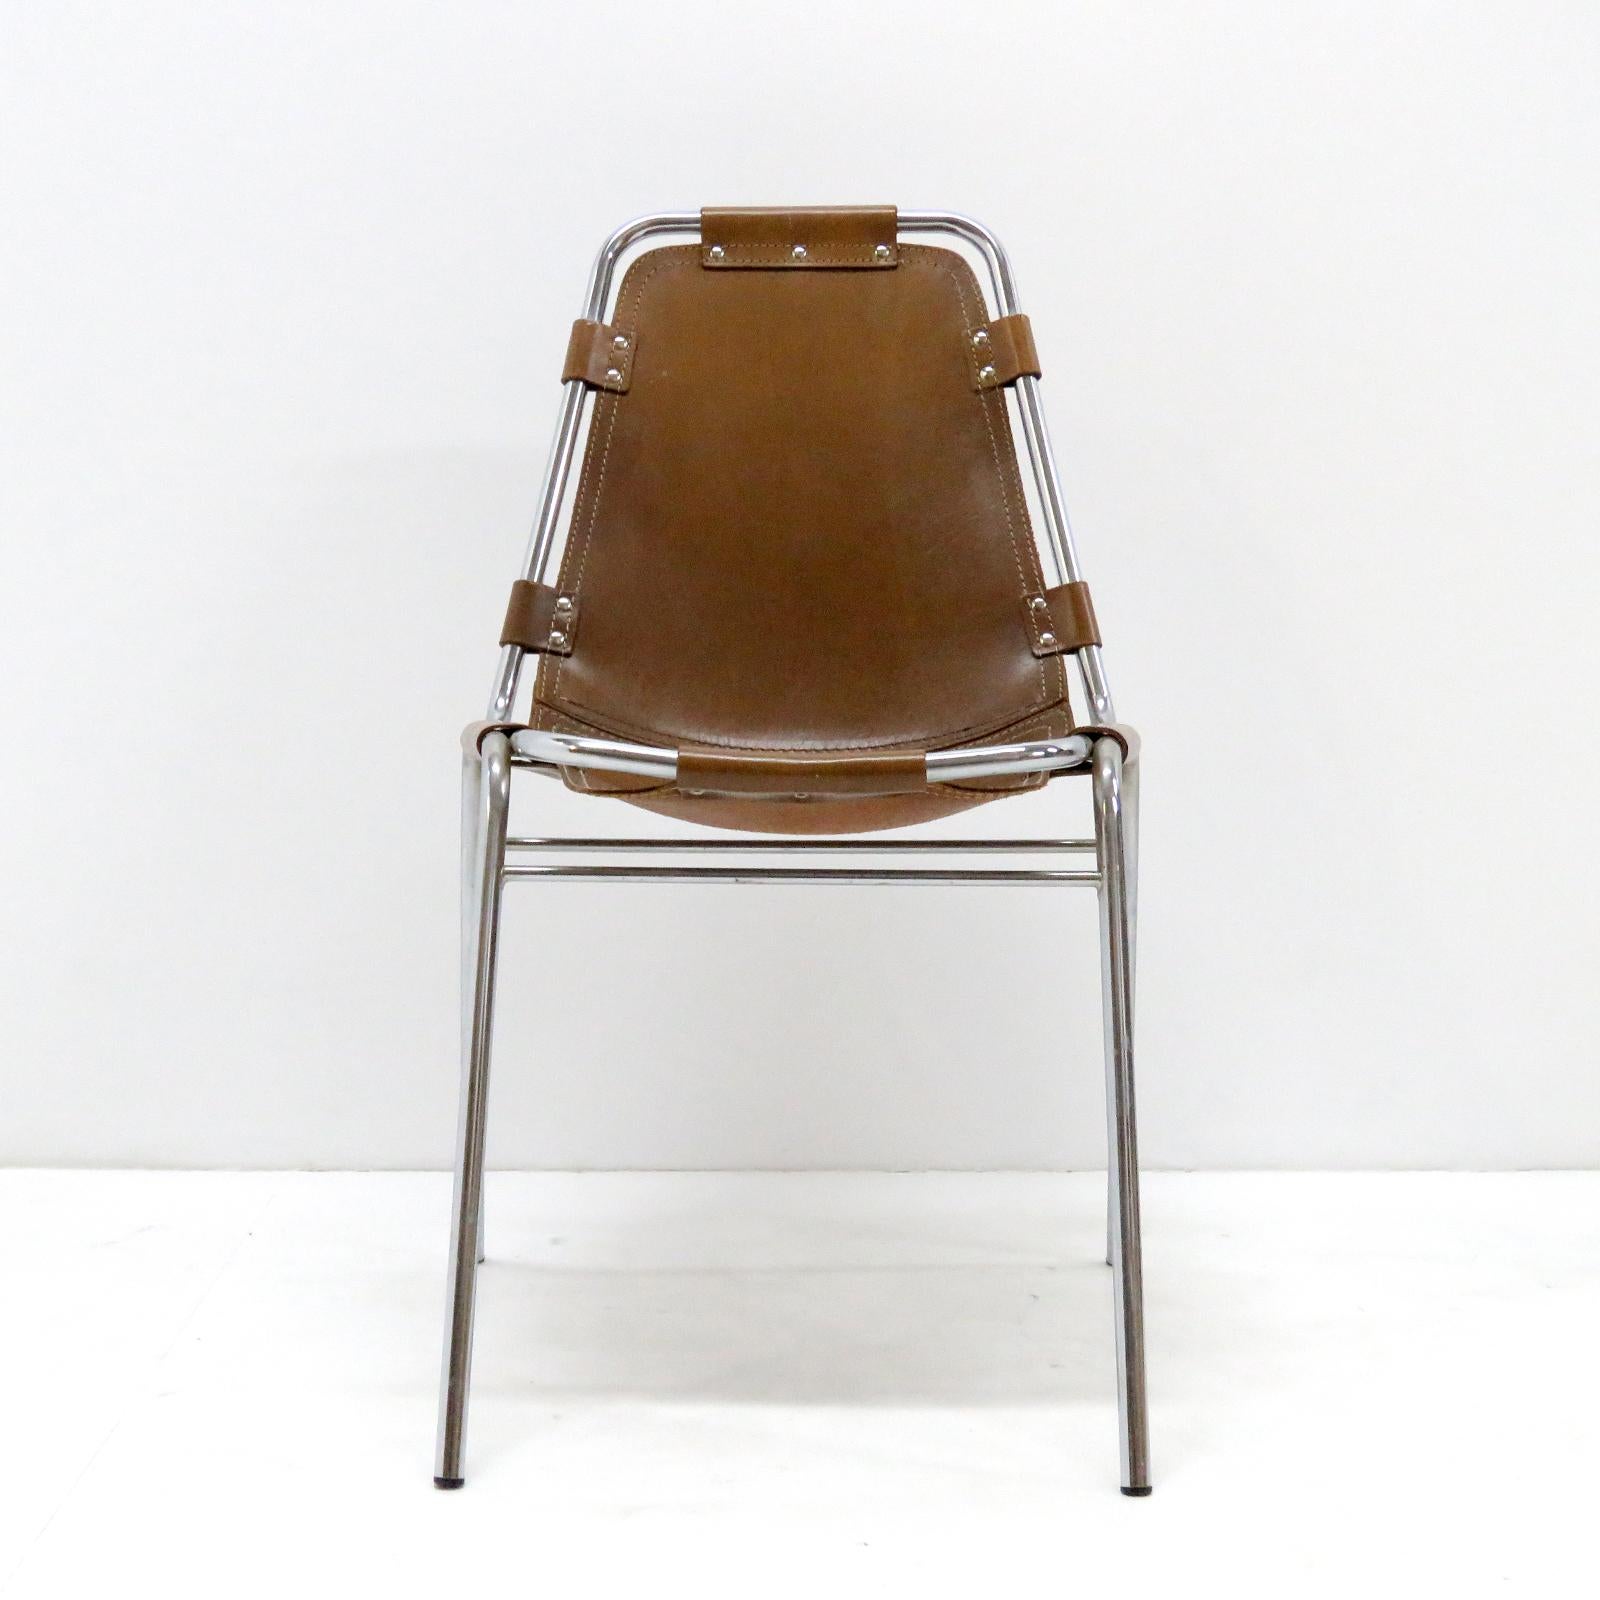 Iconic leather and metal side chairs selected by Charlotte Perriand for the Ski resort Les Arcs in 1960, with chrome tubular frame in great condition and high quality thick leather seat with a fantastic patina to the leather. Two chairs available,